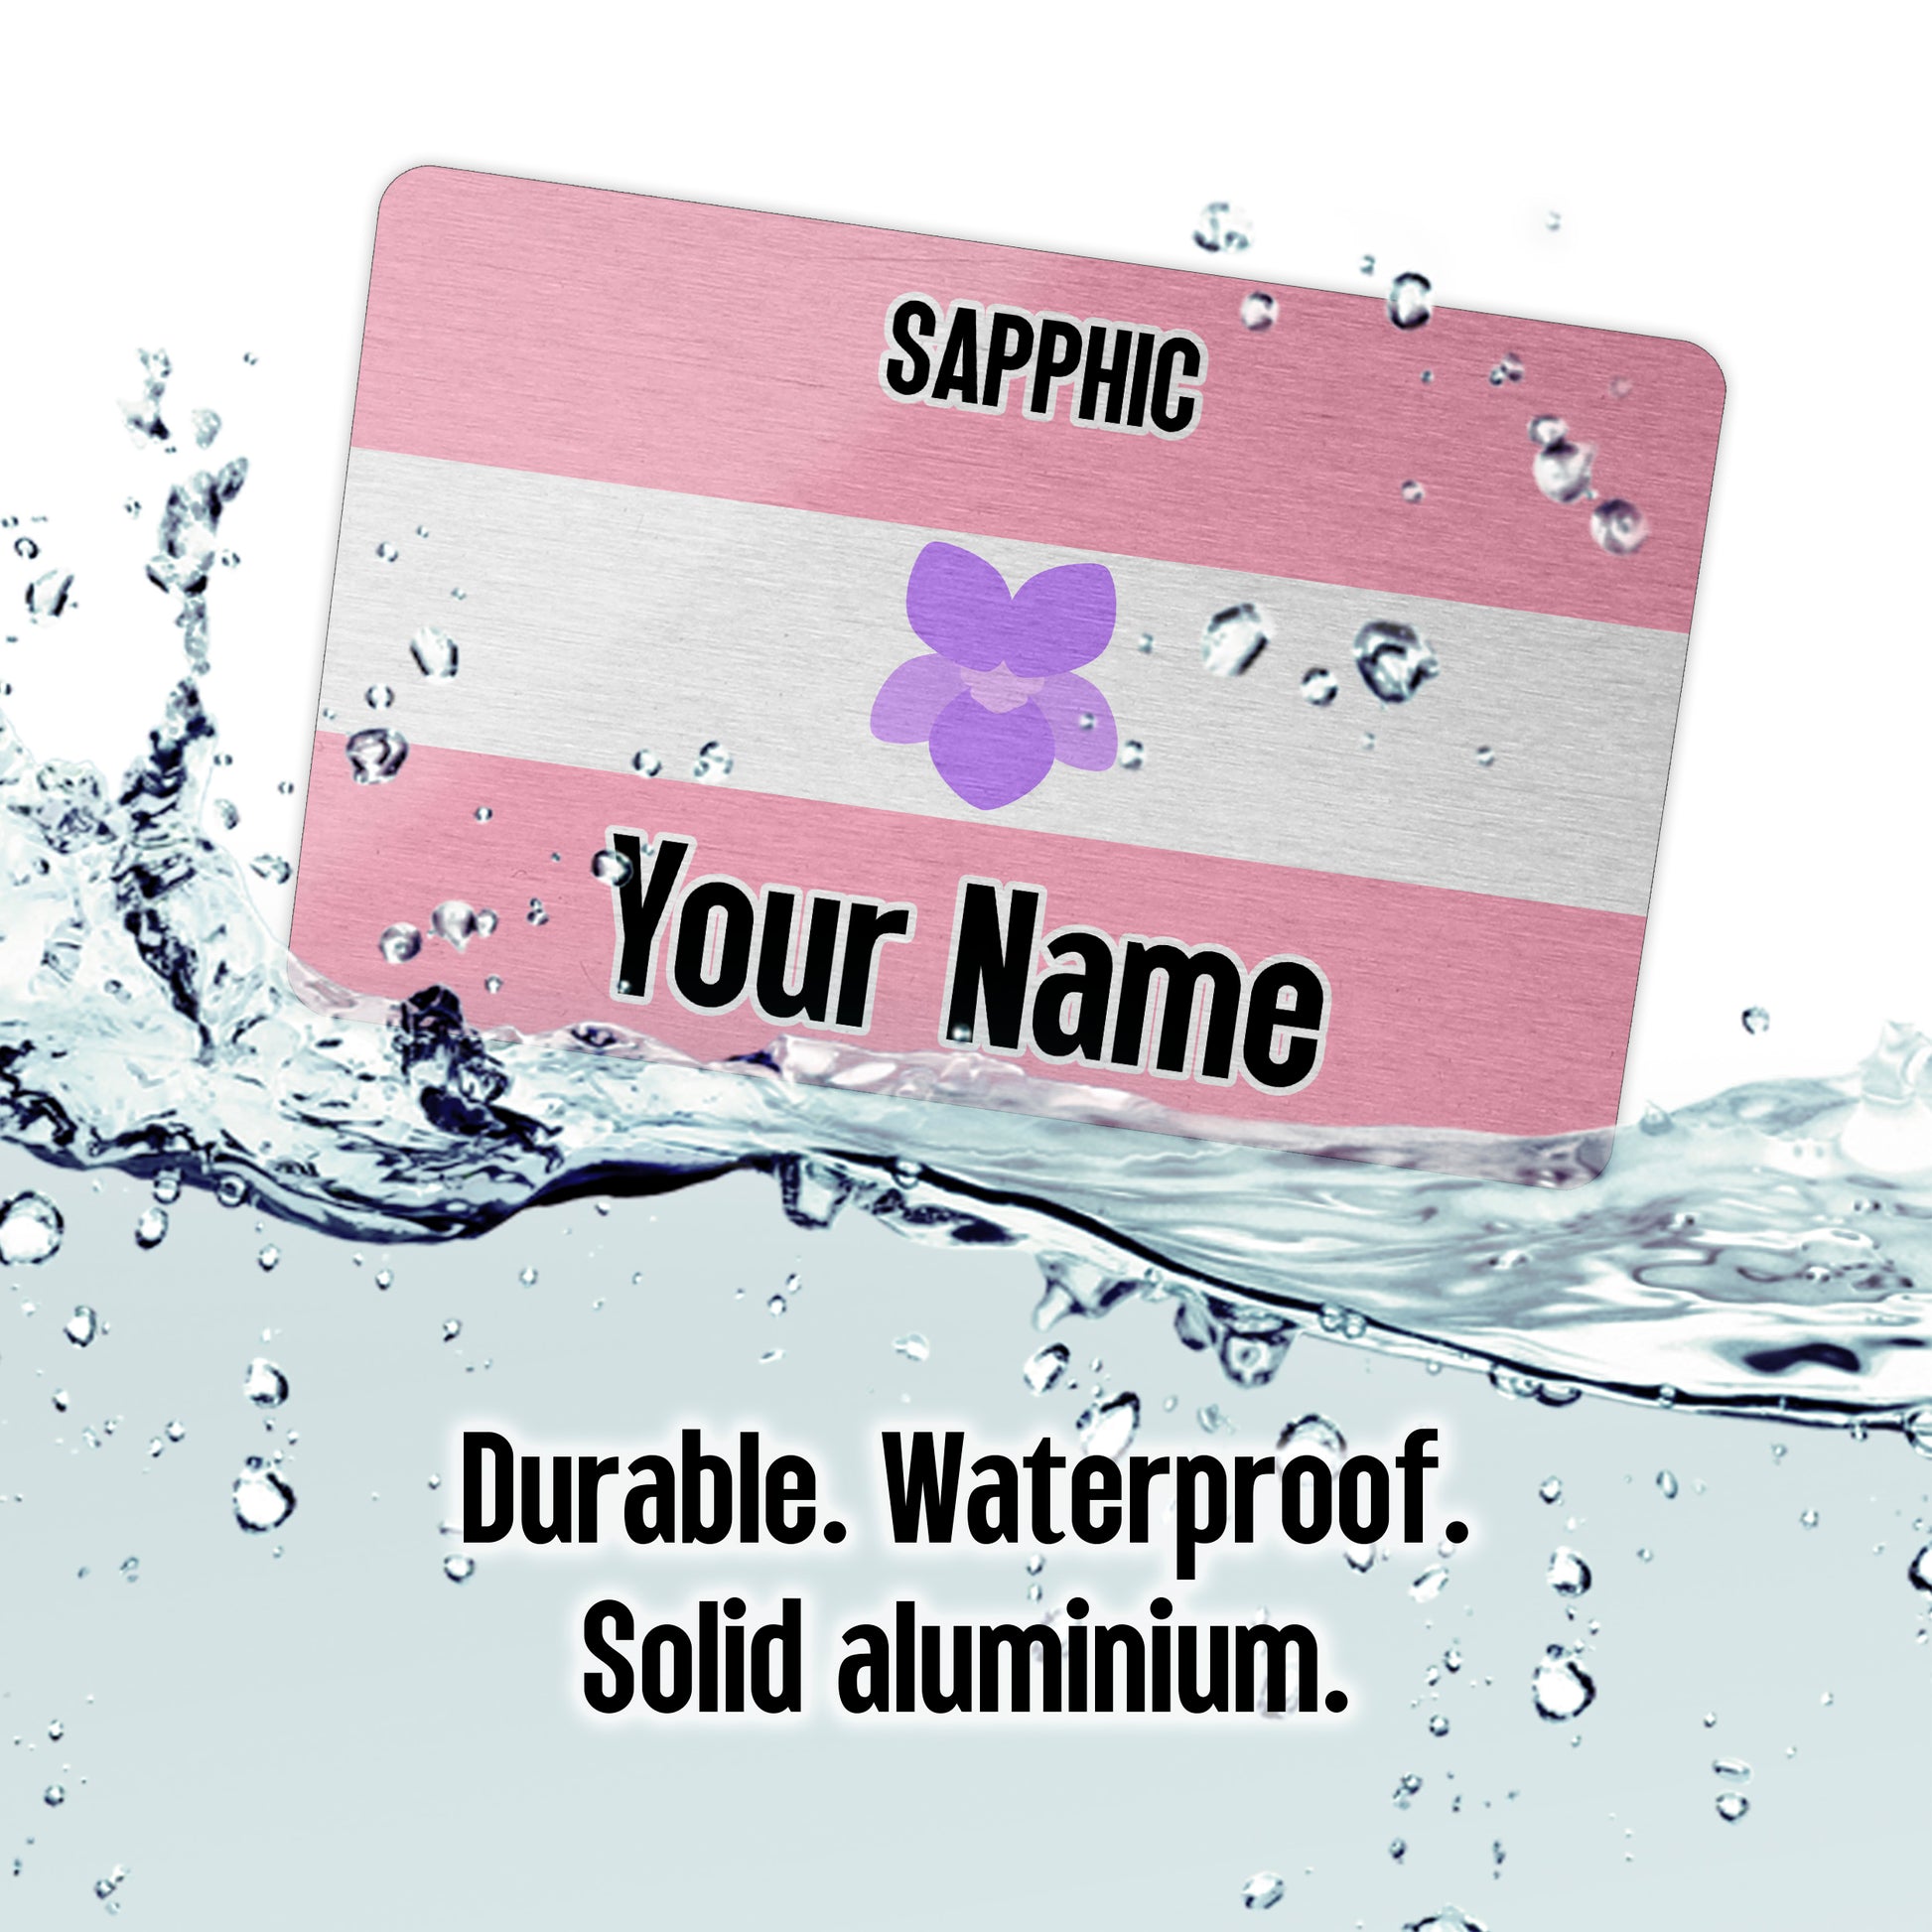 Aluminium metal novelty wallet card personalised with your name and the sapphic pride flag